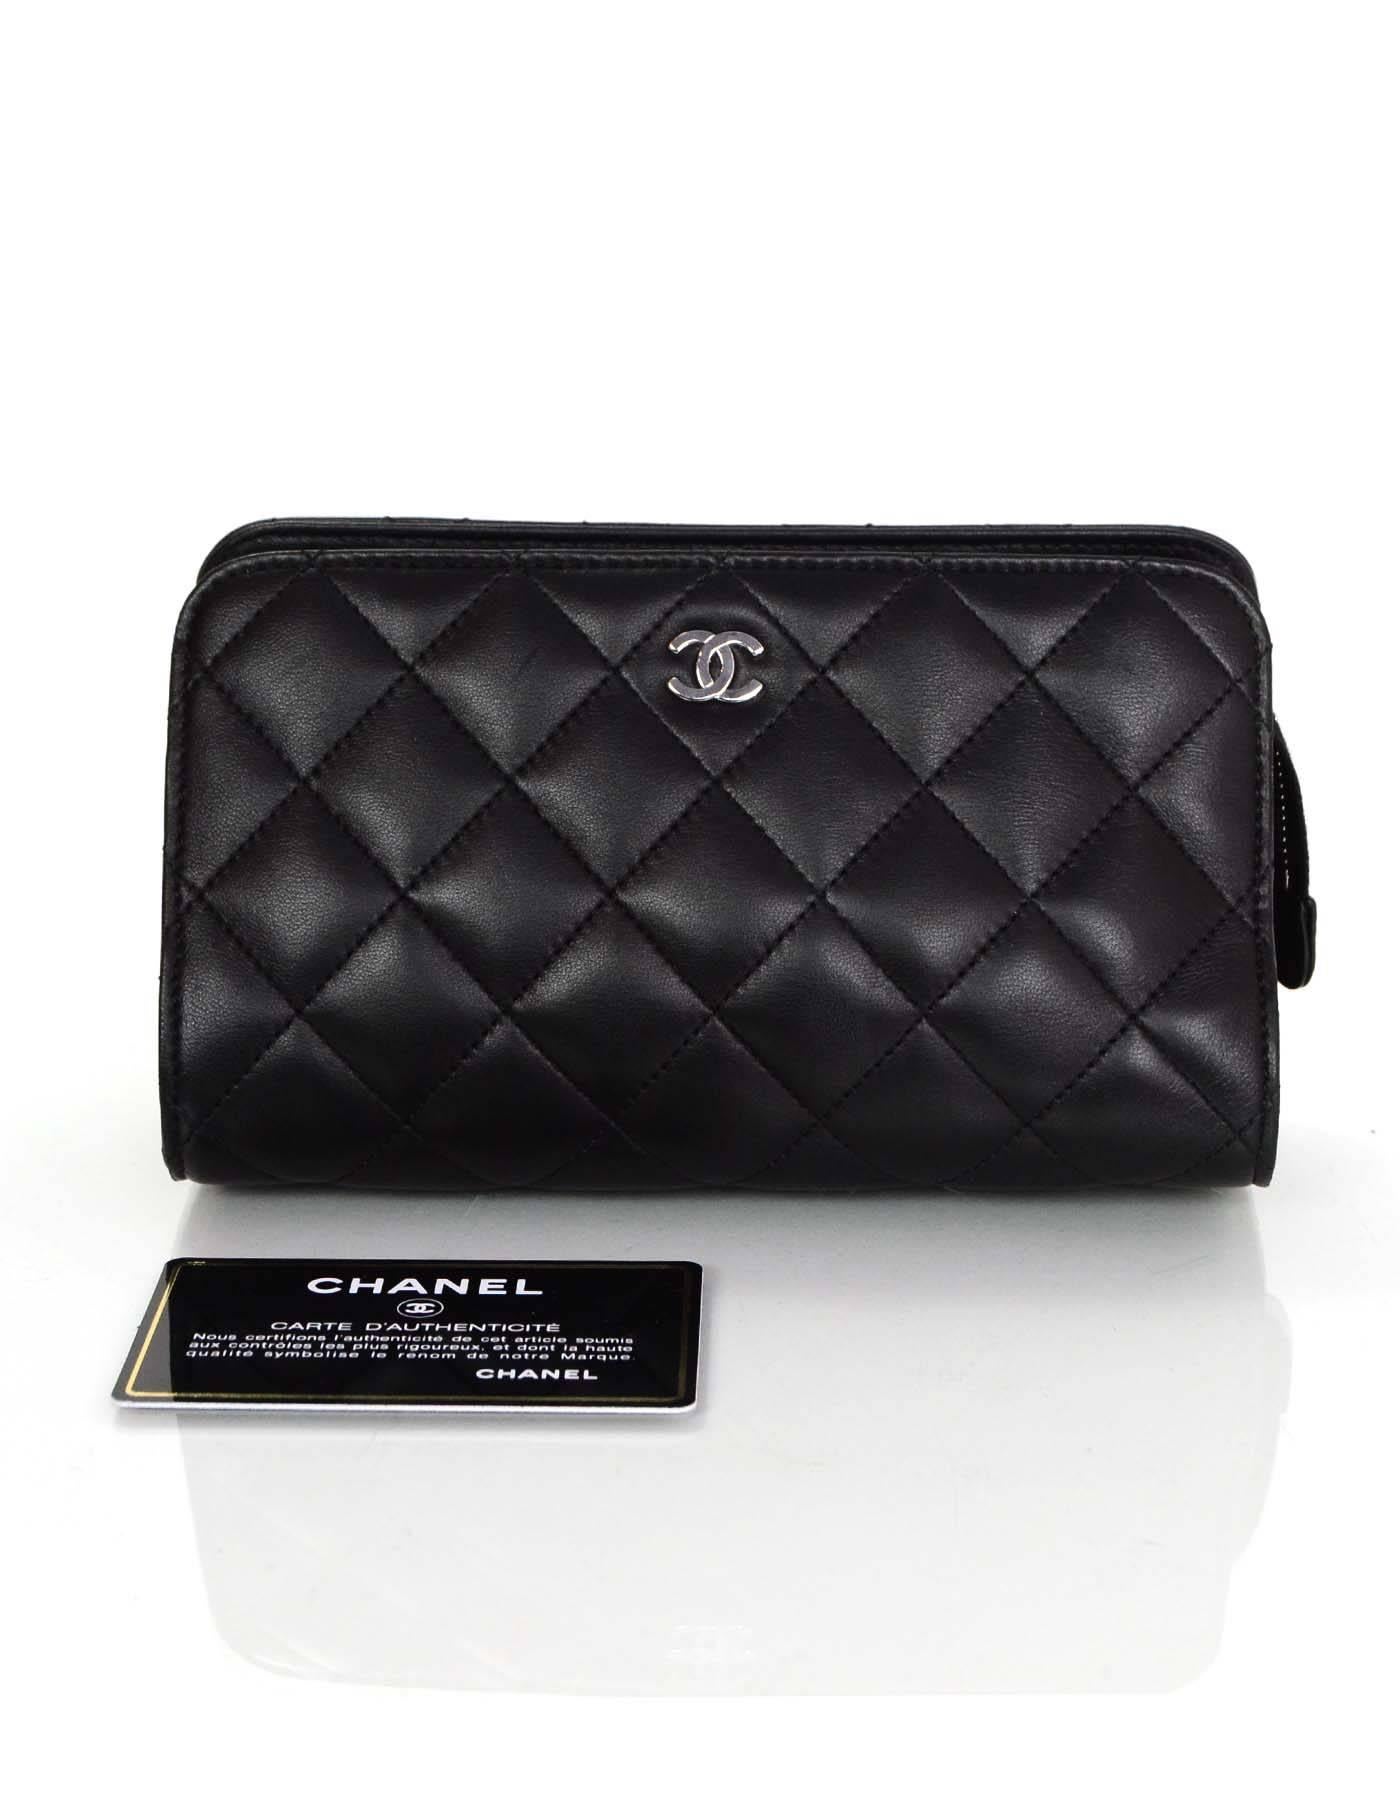 Chanel Black Lambskin Leather Quilted Cosmetic Bag/Clutch w/ Leather Lining 1